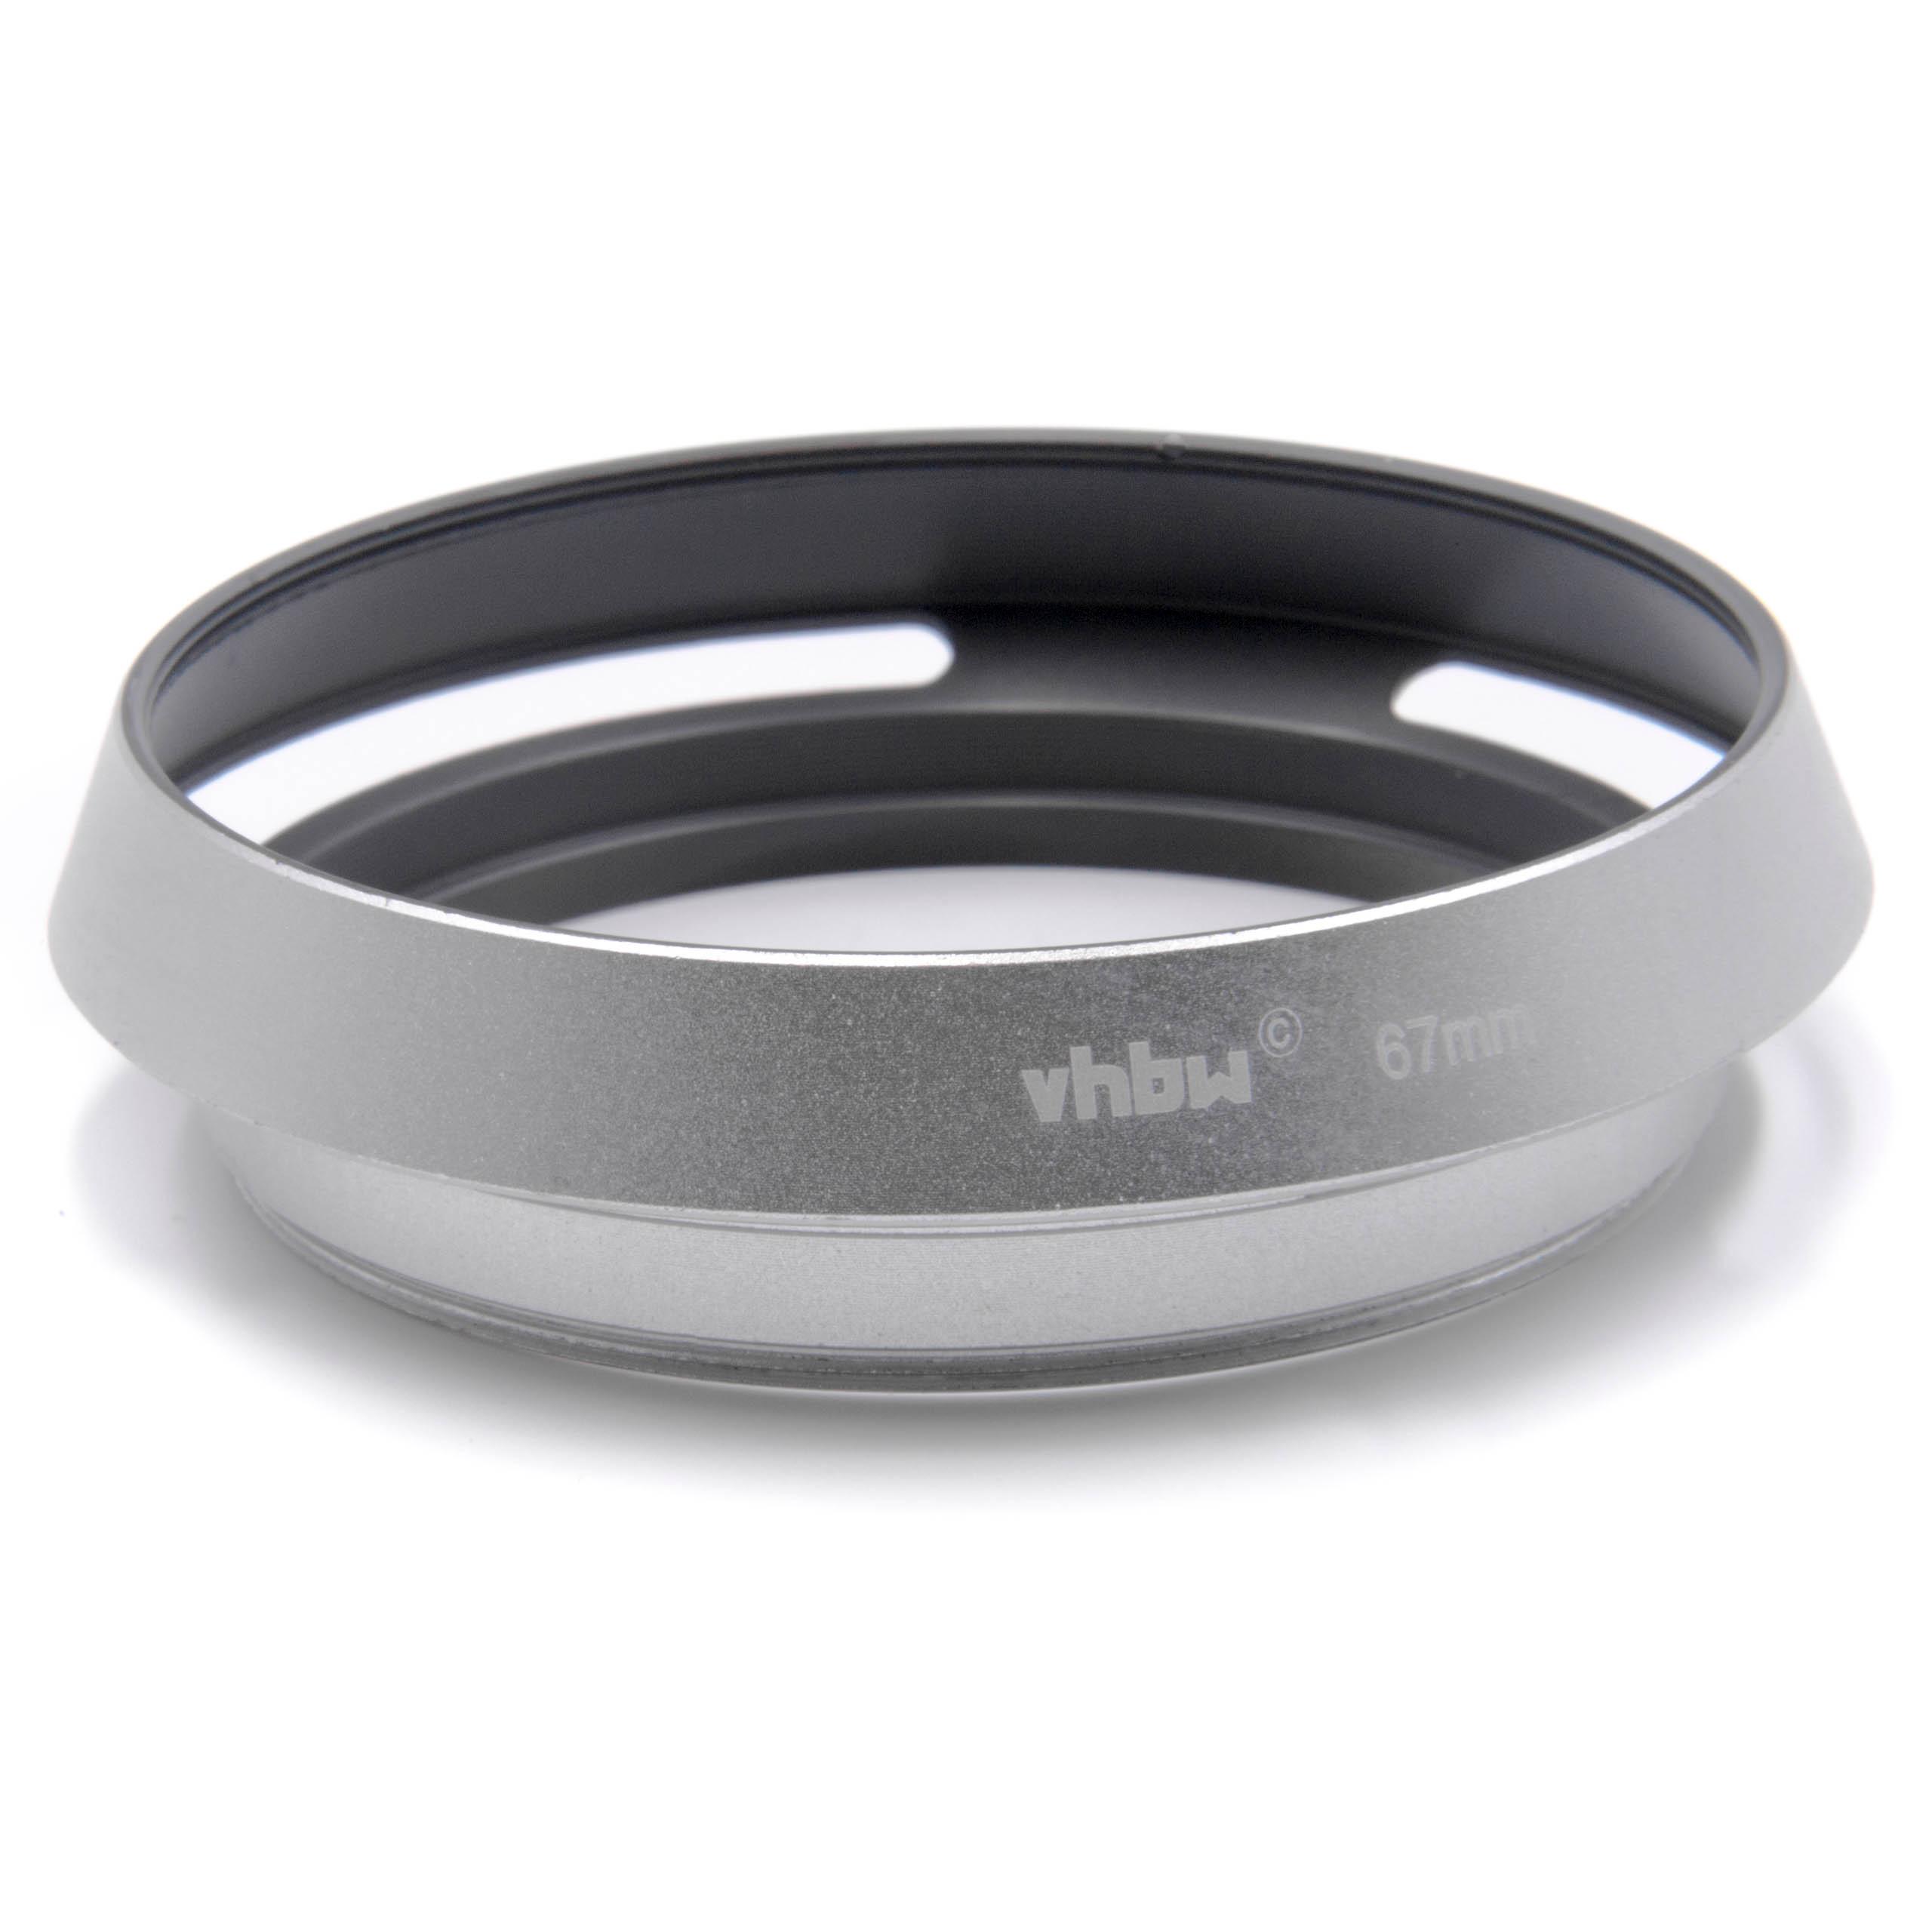 Lens Hood suitable for 67mm Lens - Lens Shade Silver, Round